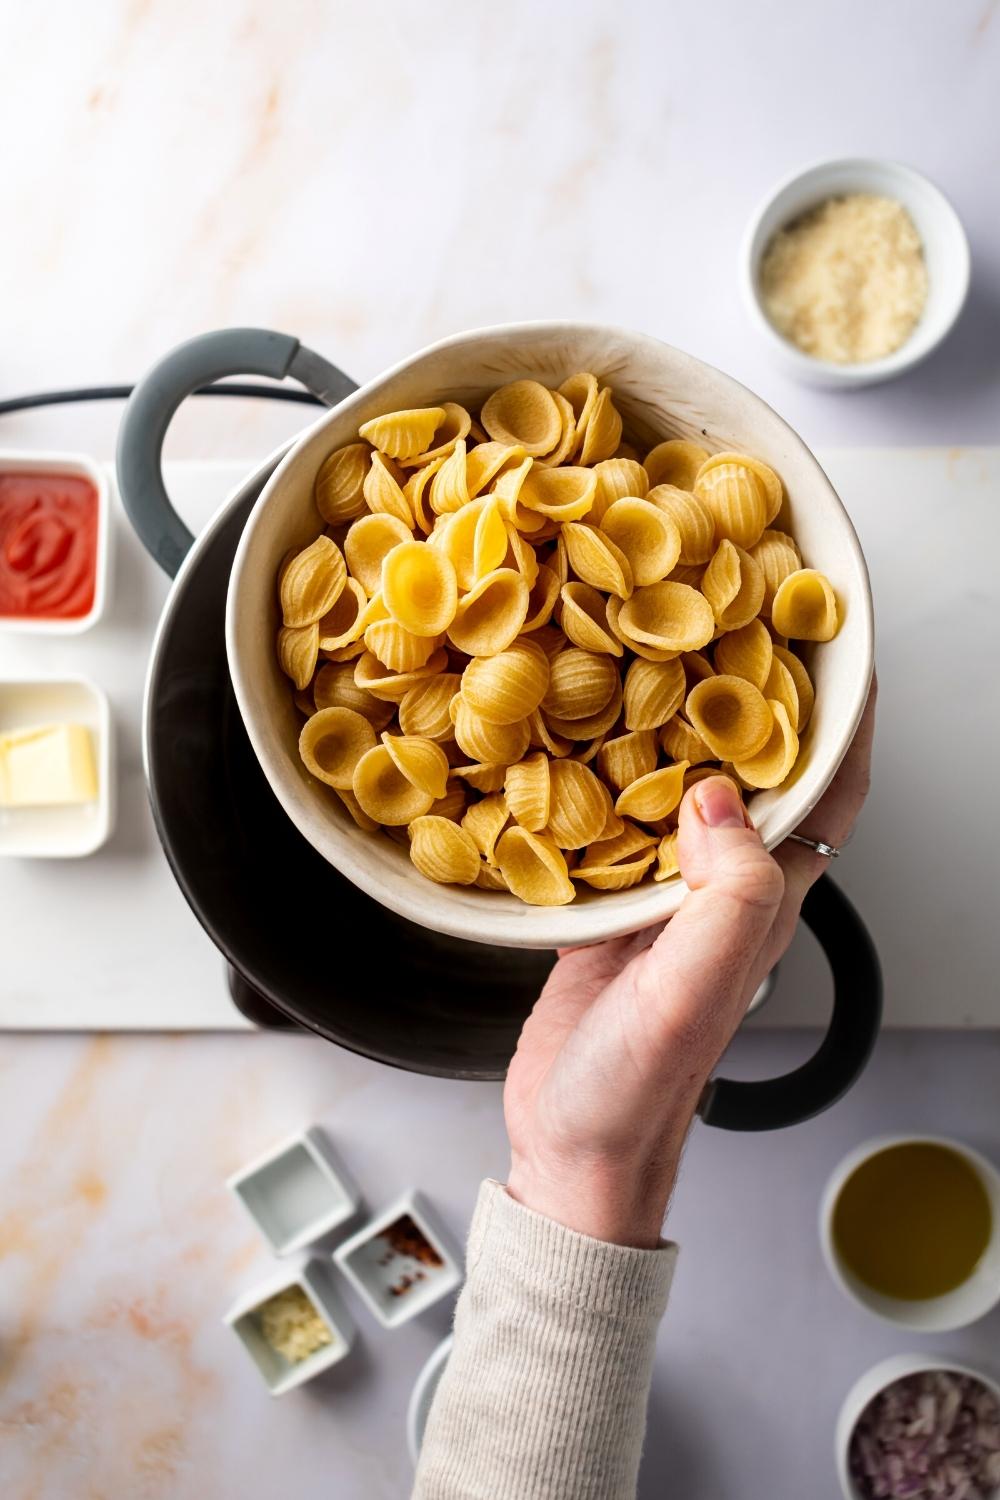 A hand holding a white bowl with pasta shells in it over a pot.